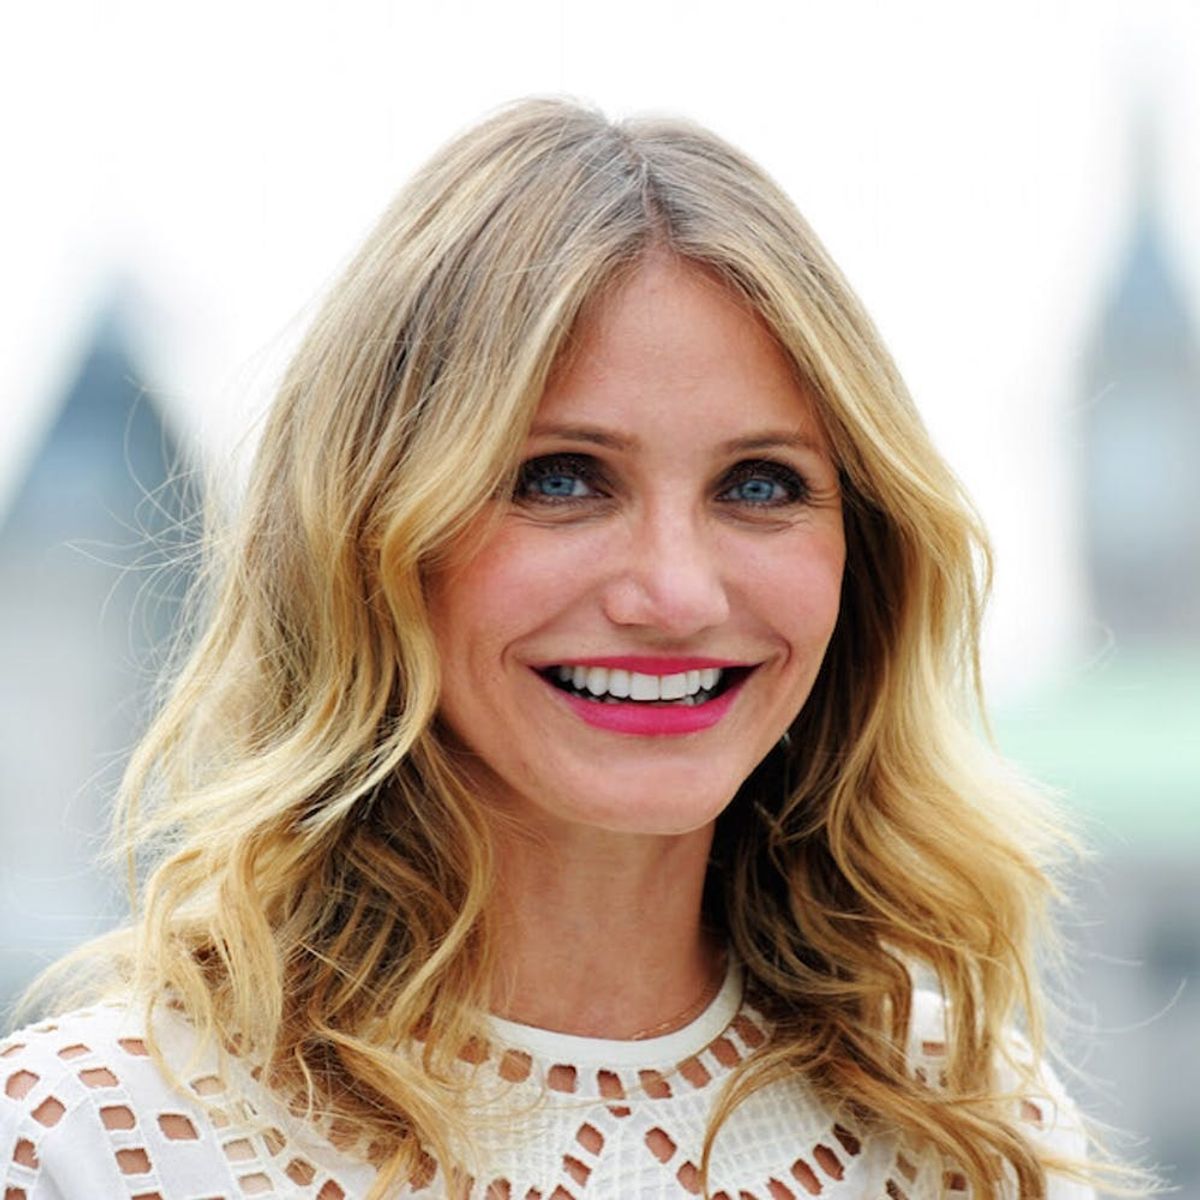 Morning Buzz! Cameron Diaz’s Totally Makeup-Free Selfie Comes With an Important Message + More